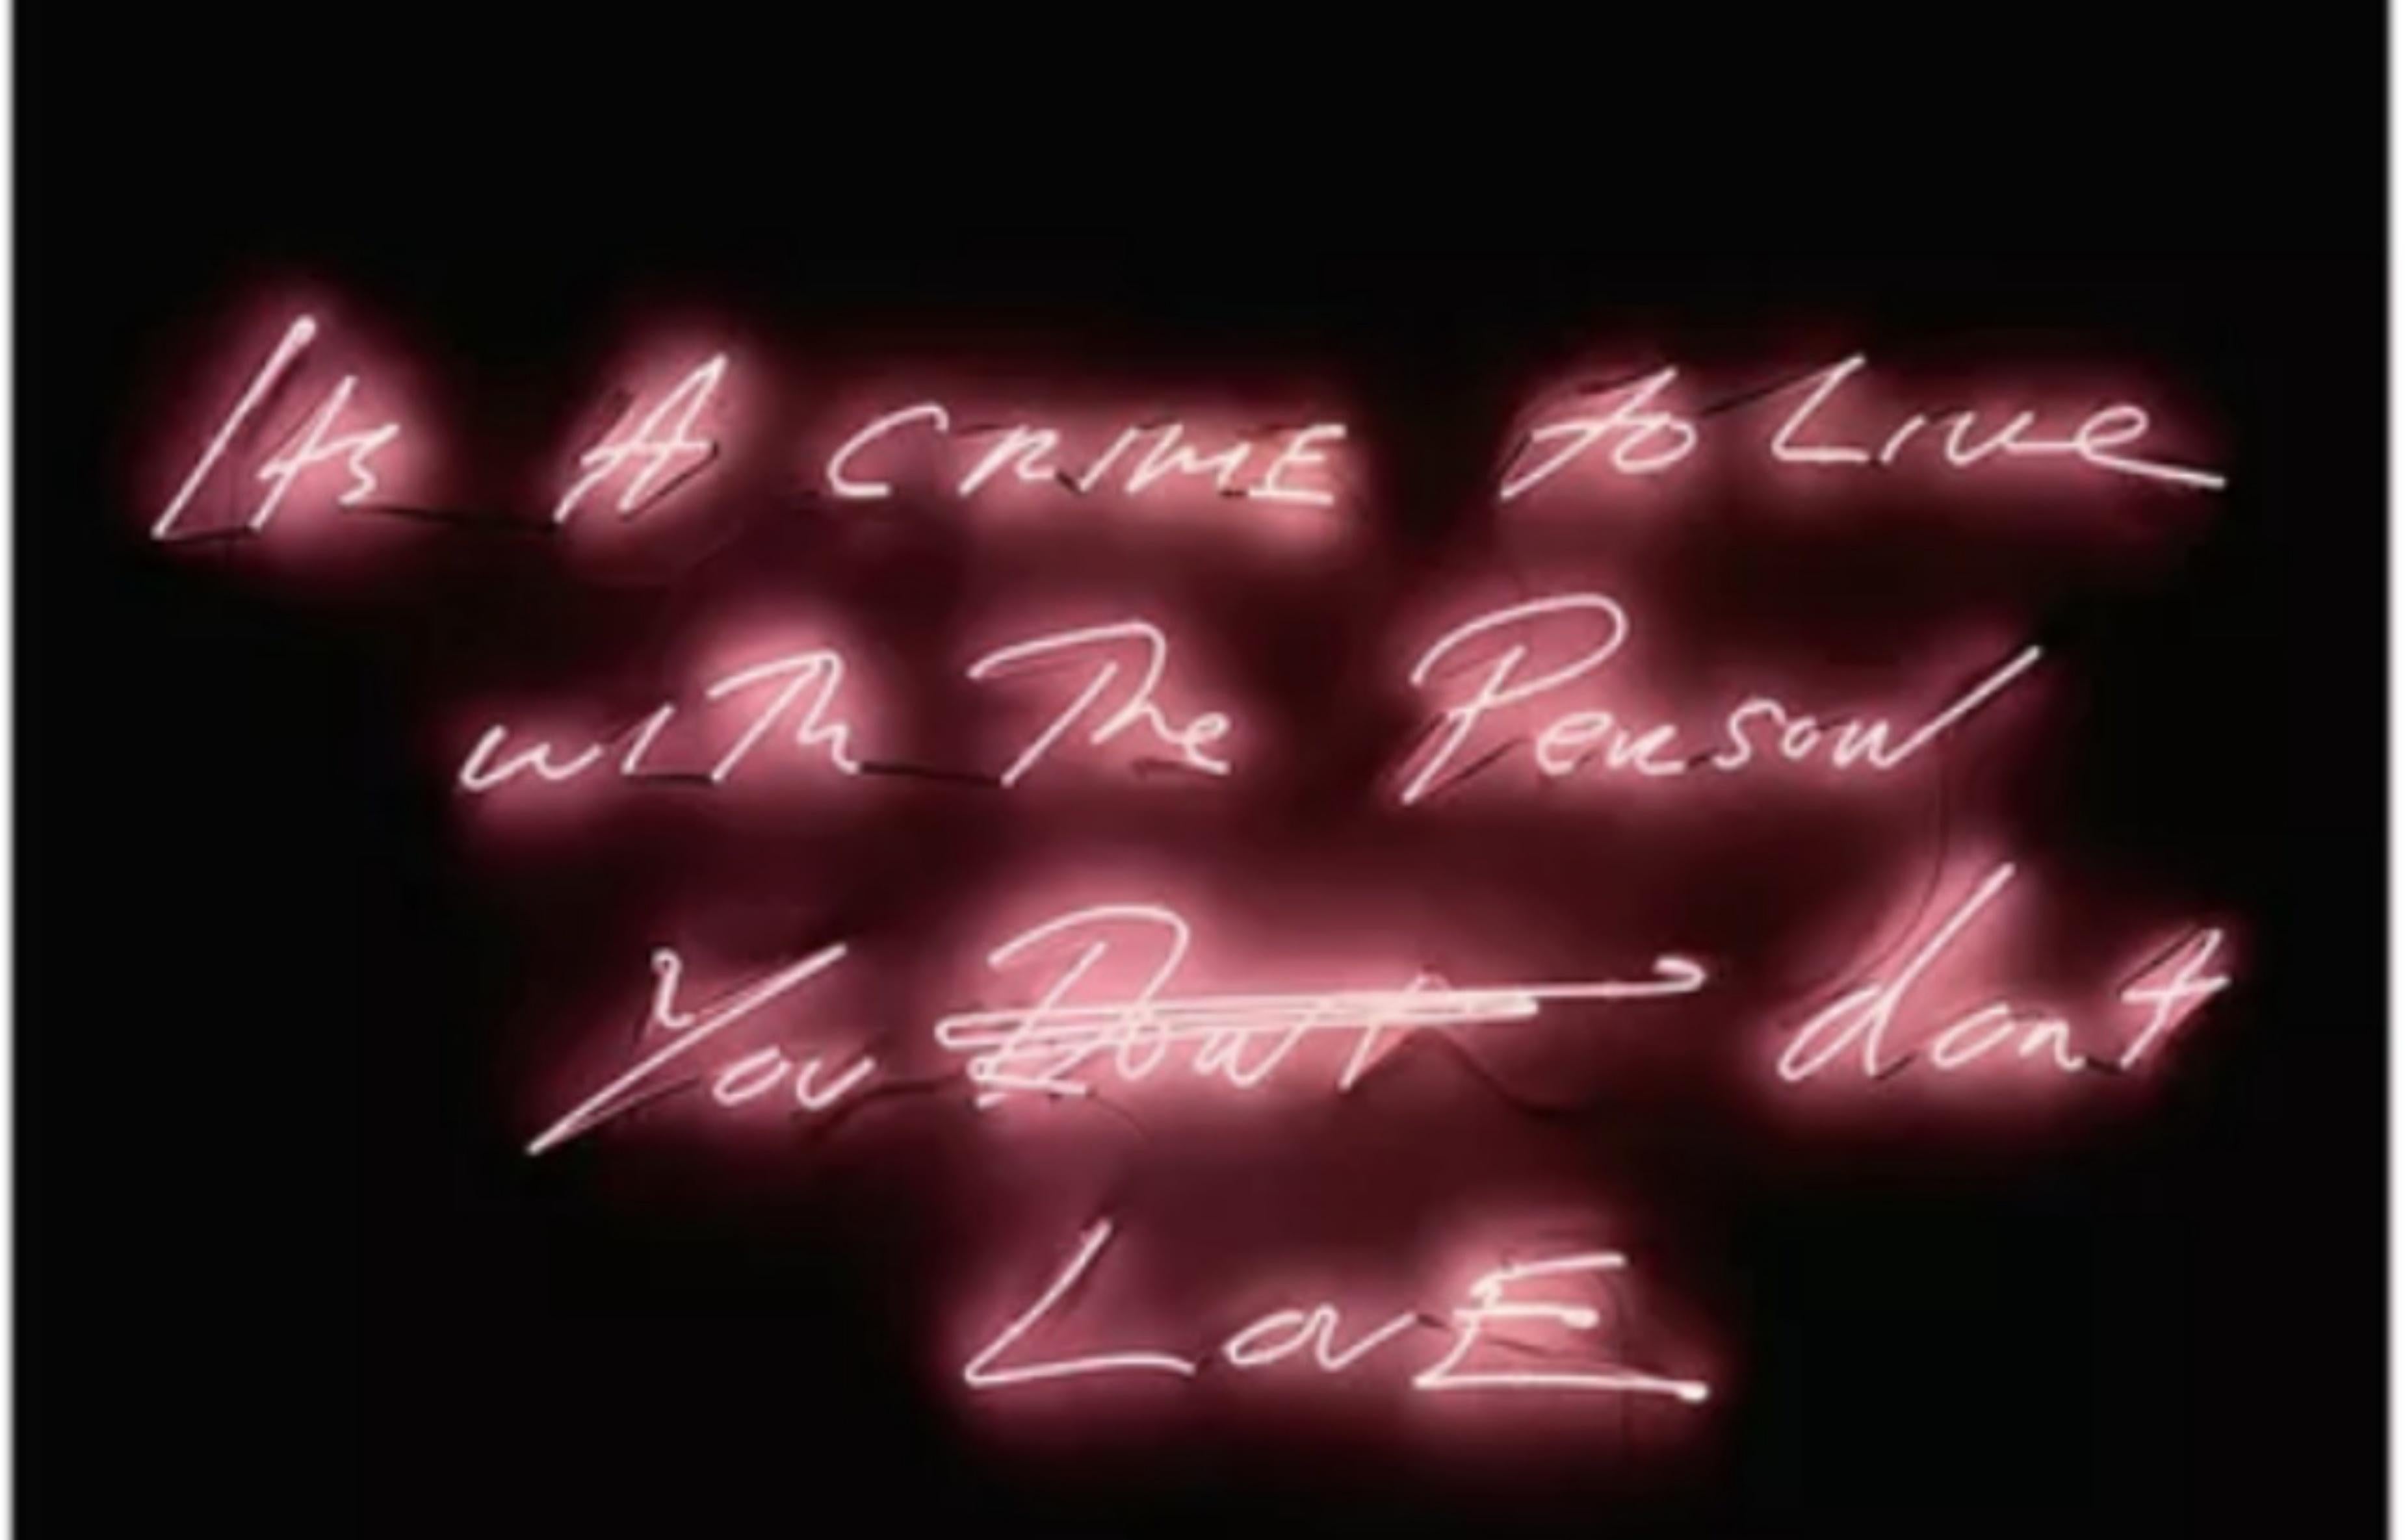 It's a Crime to Live with the Person You Don't Love with official COA + hologram - Print by Tracey Emin